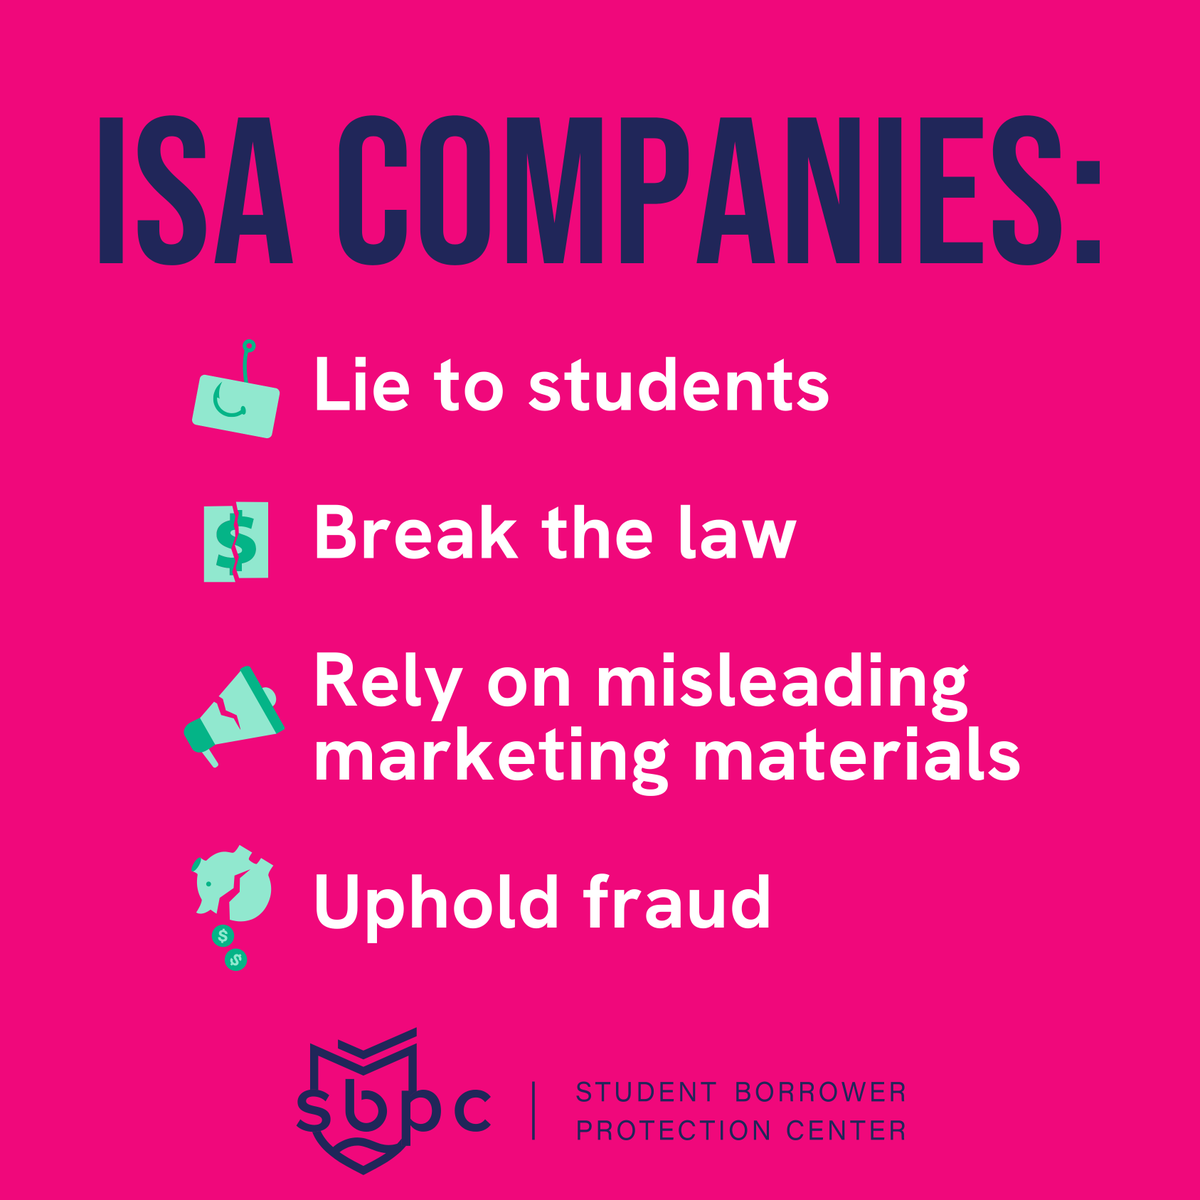 Income Share Agreements (ISAs) are a pricey, opaque form of private student loan armed with $$$ from Wall Street and Silicon Valley. ISA companies: ❌Lie to students ❌Break the law ❌Rely on misleading marketing materials ❌Uphold fraud